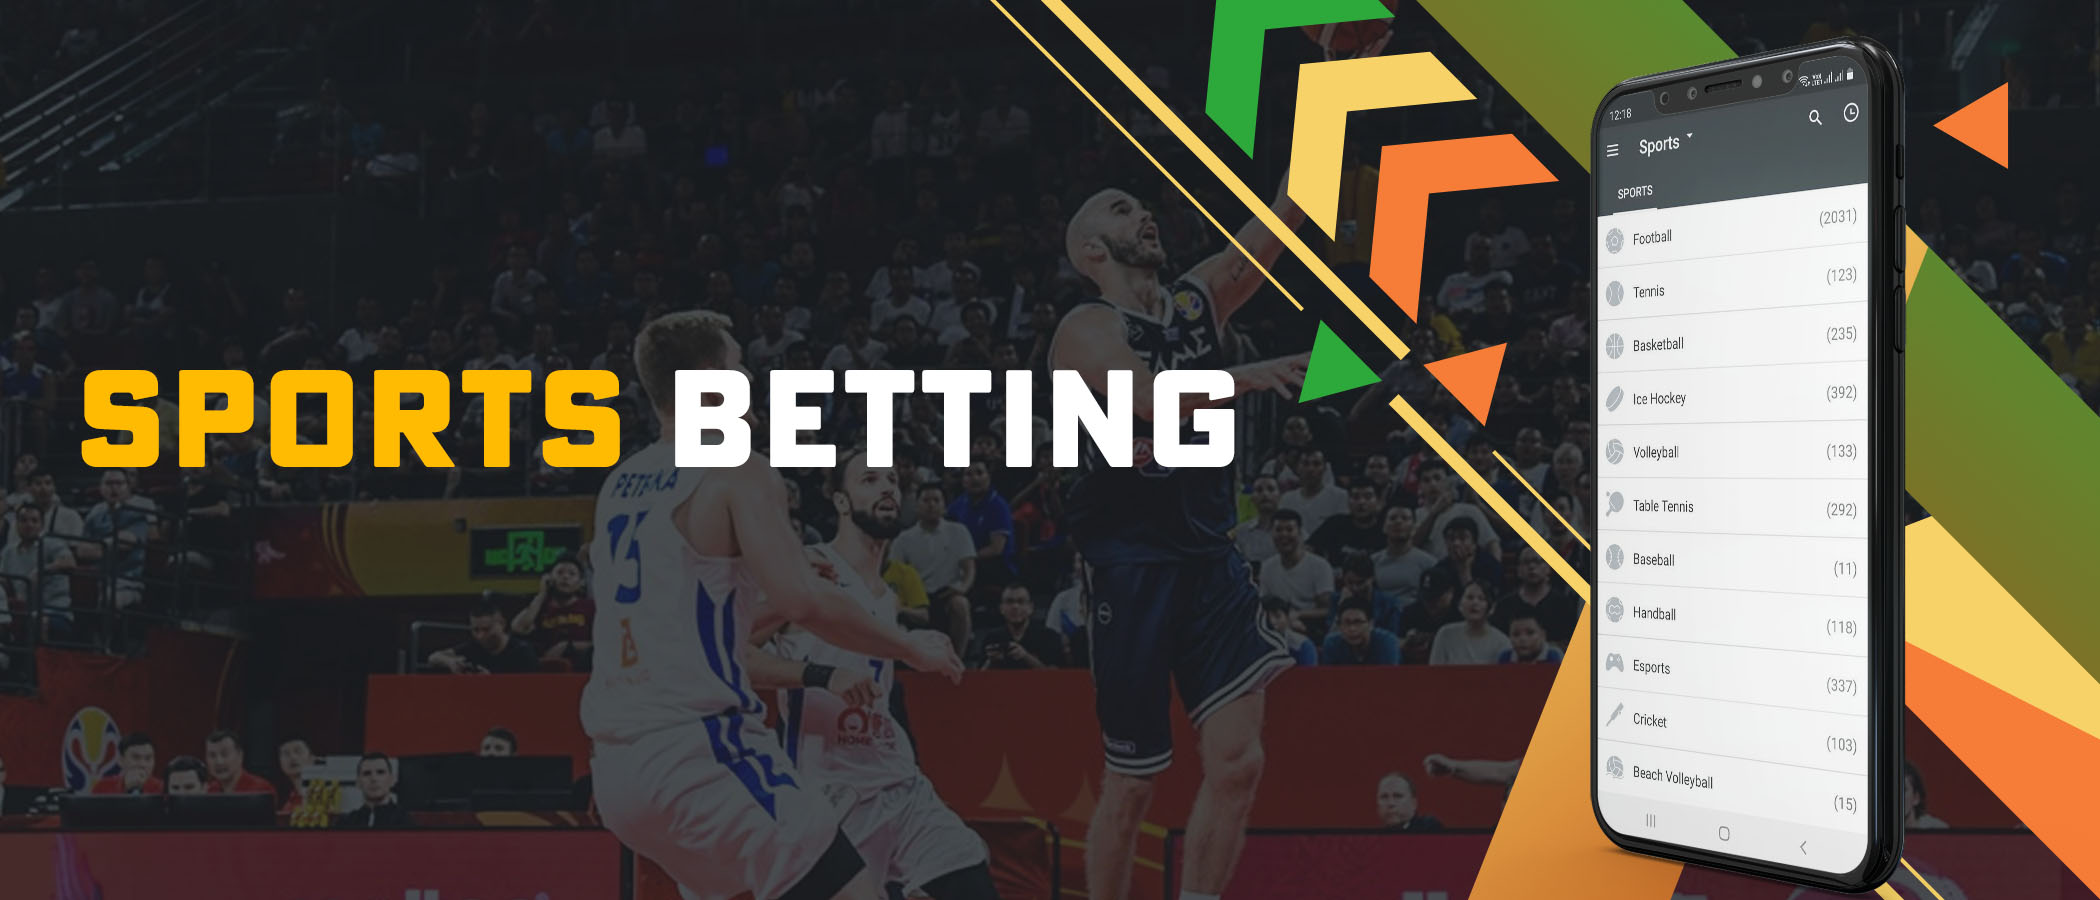 The Melbet bookmaker specializes in sports gambling and offers players really favorable conditions